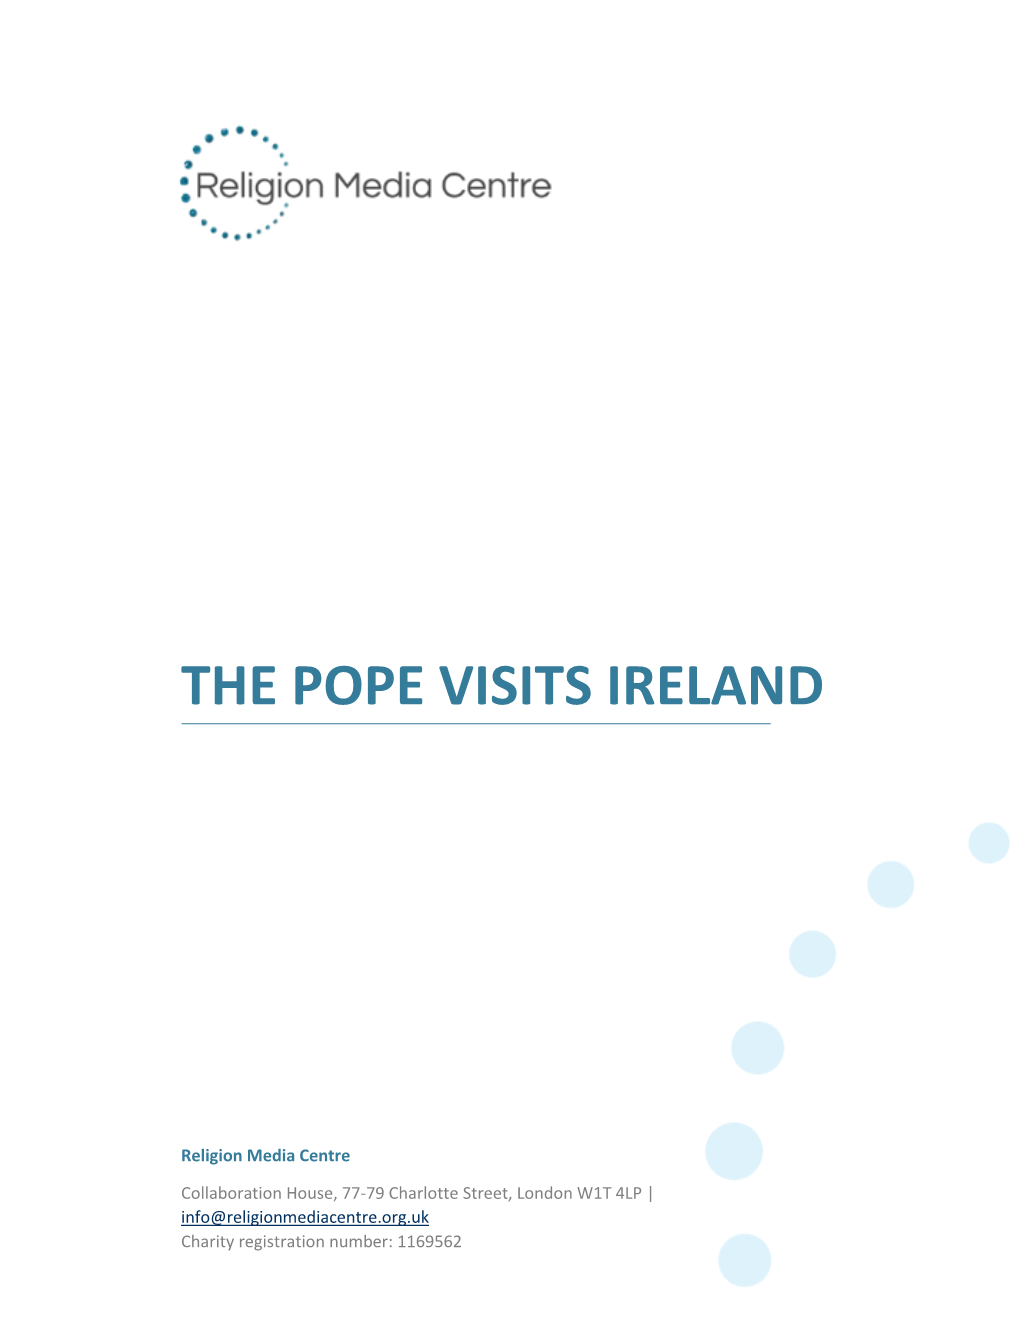 The Pope Visits Ireland